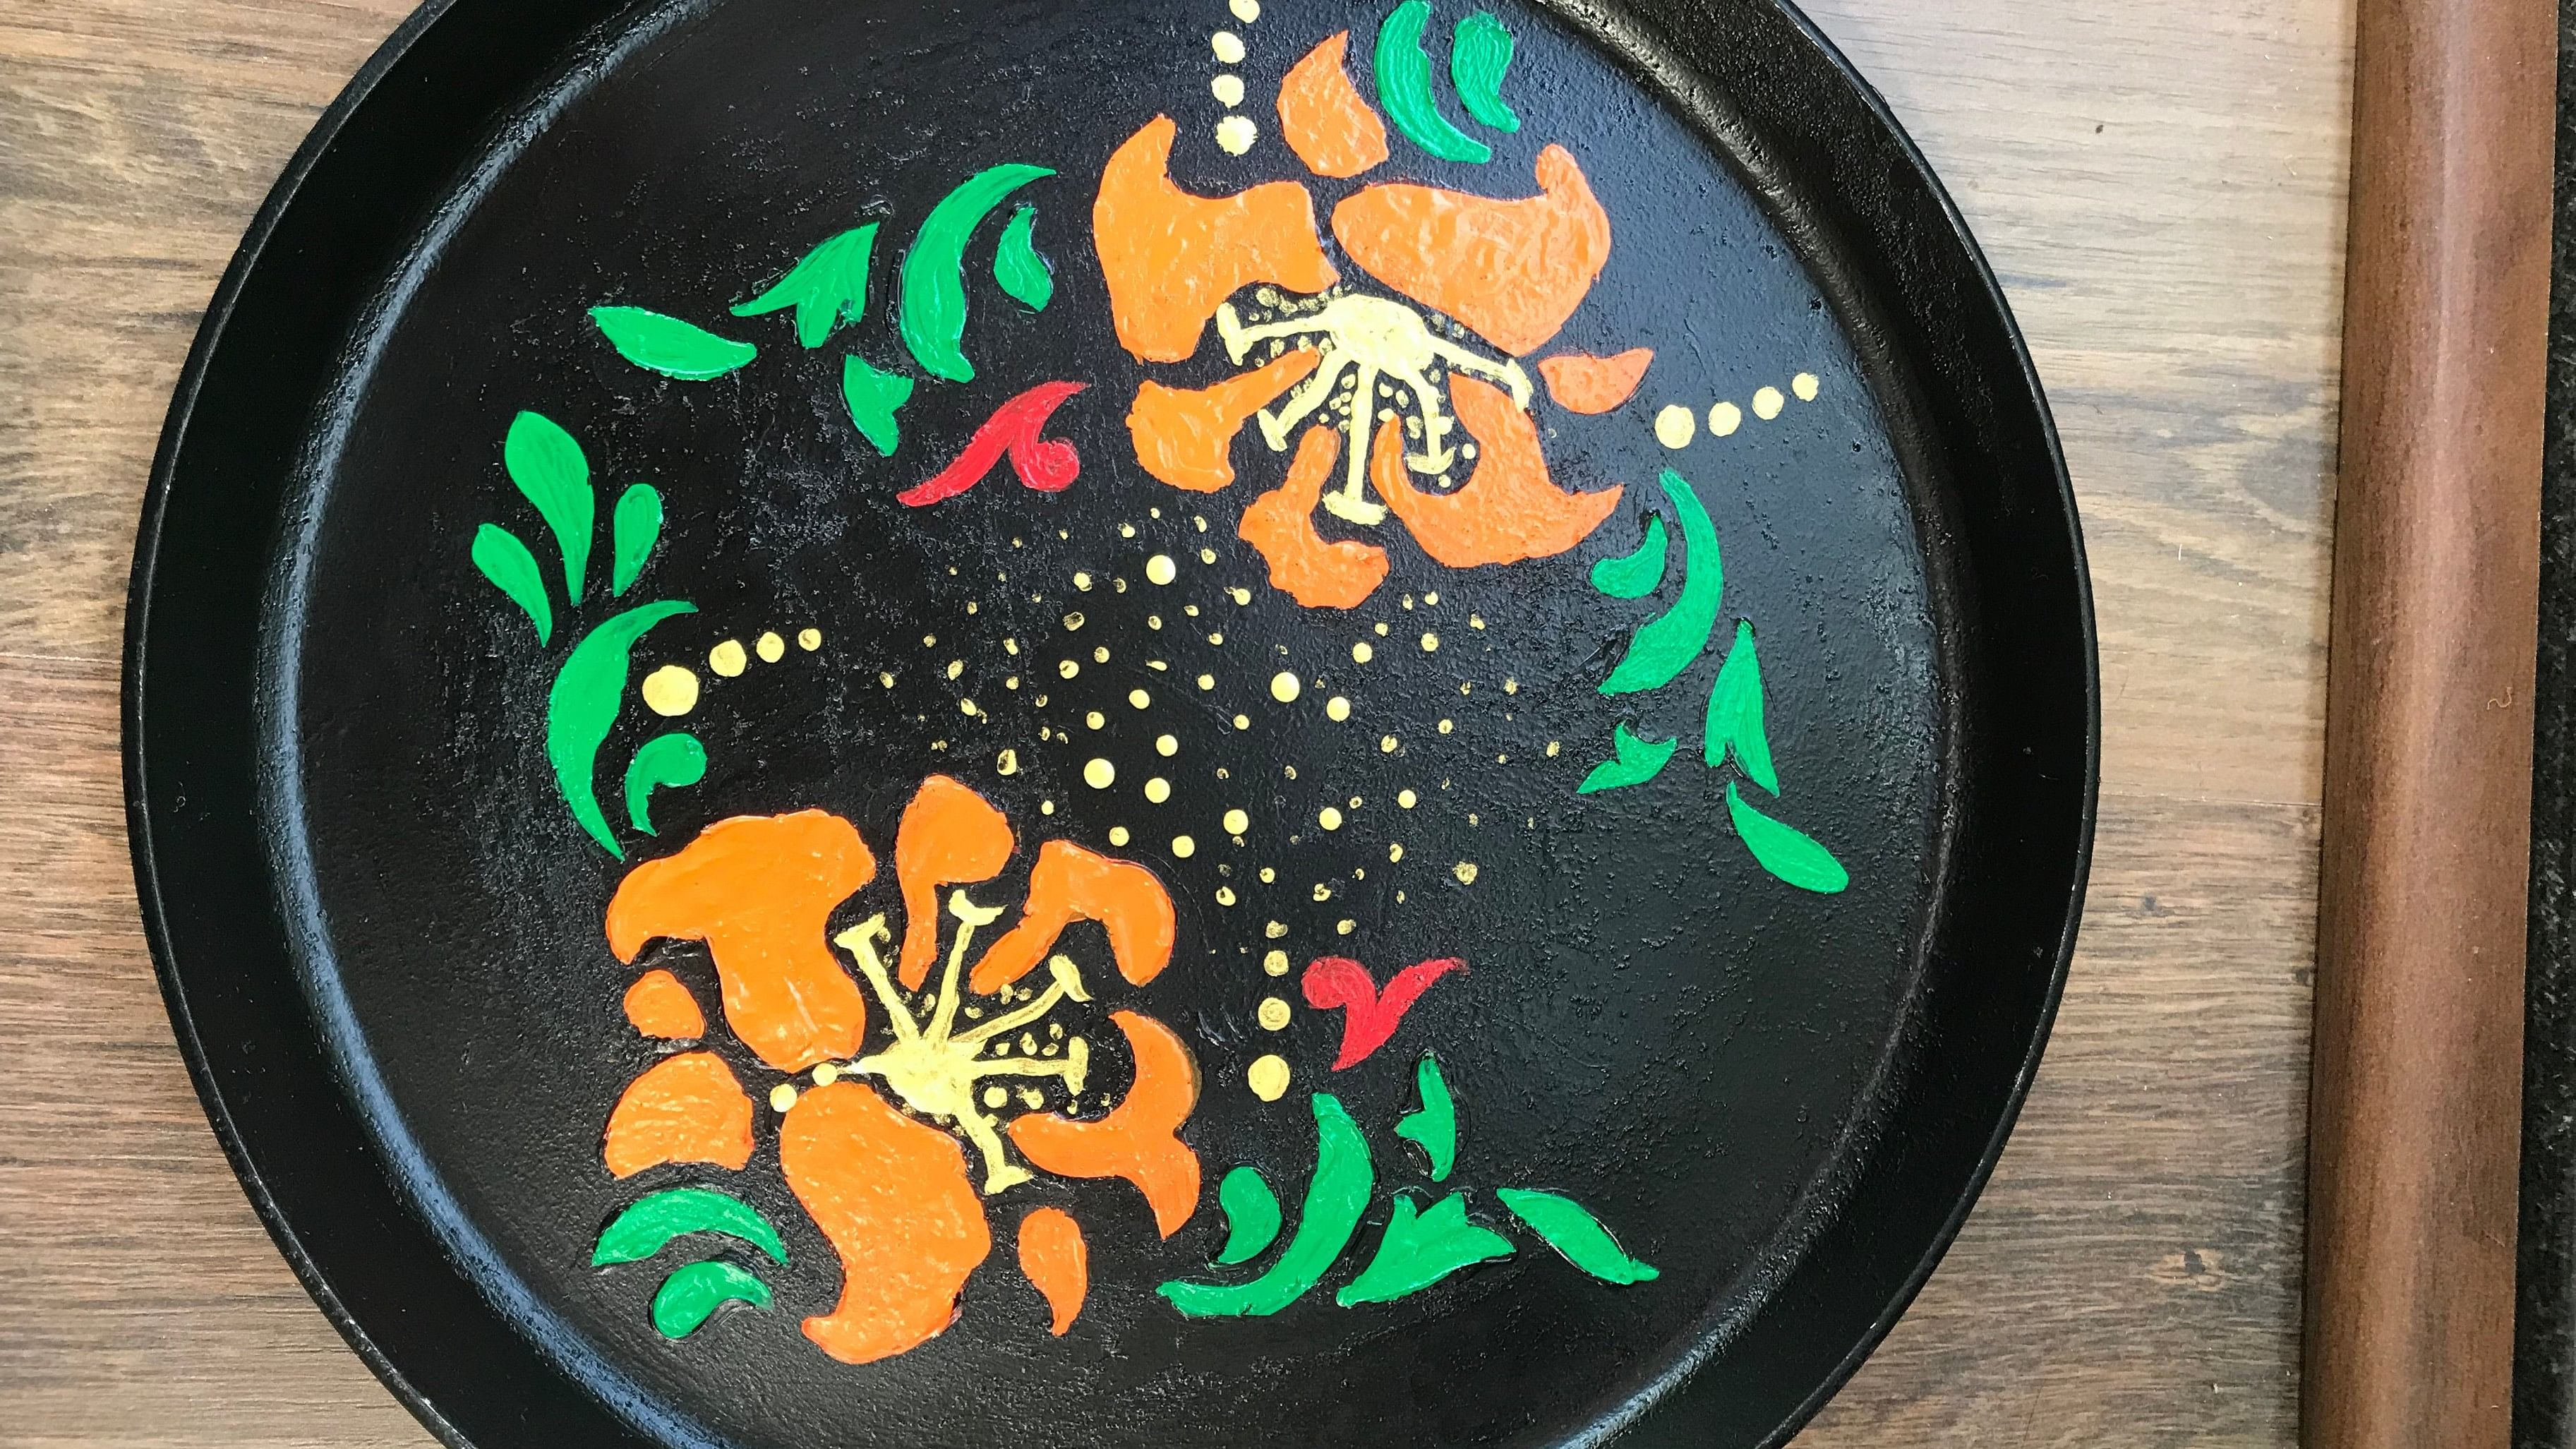 Vibrant floral designs can be done on these pans.